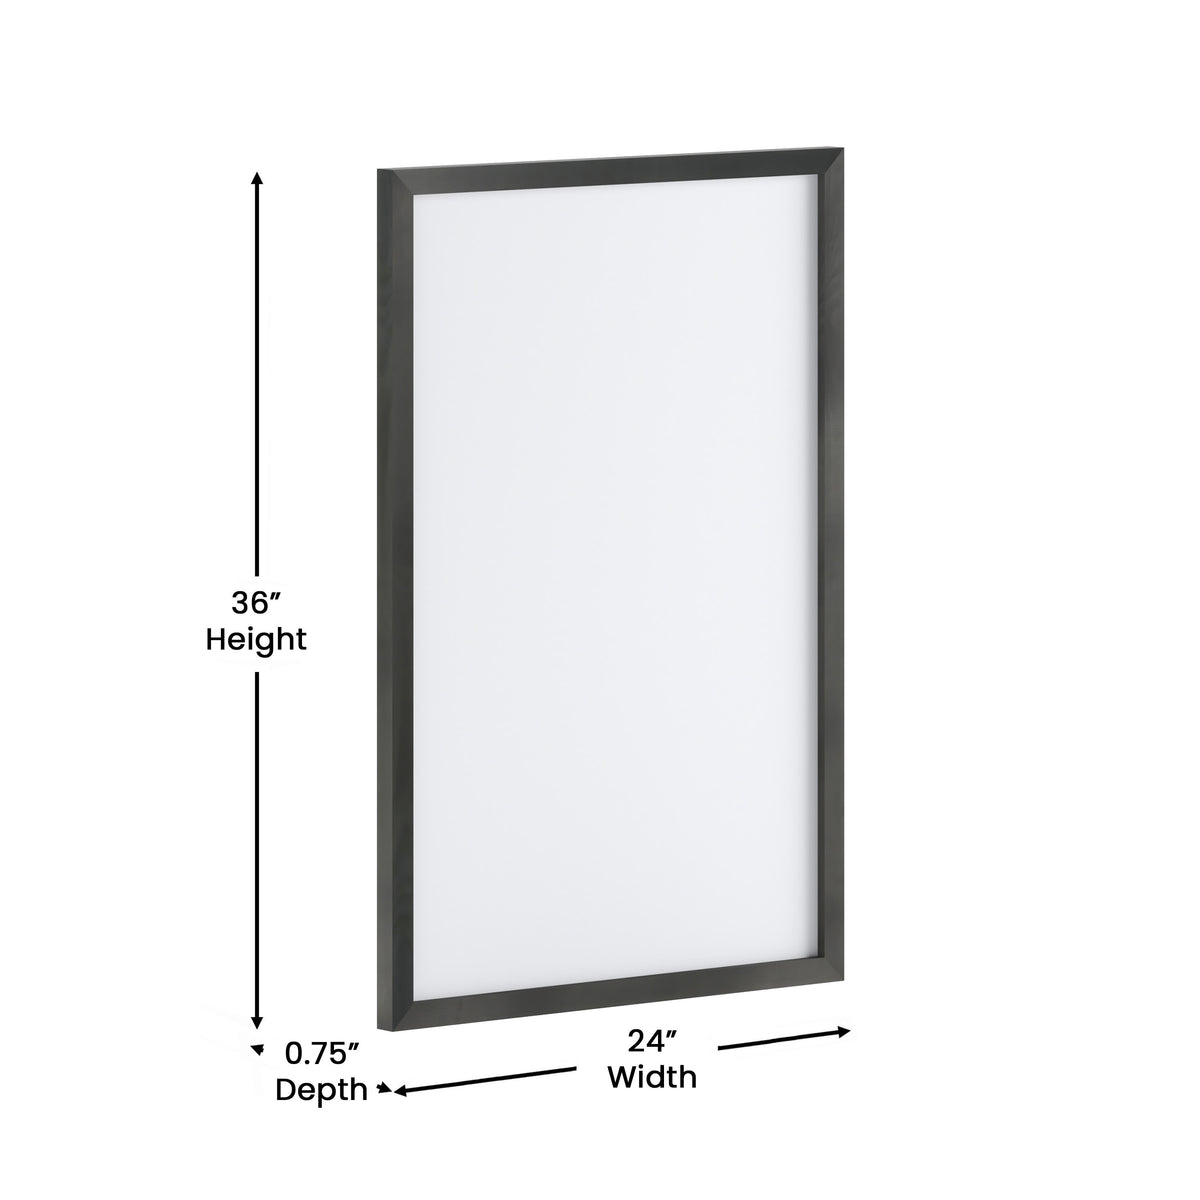 Black,24inchW x 36inchH |#| Commercial 24x36 White Board with Marker, Eraser, and 4 Magnets - Black